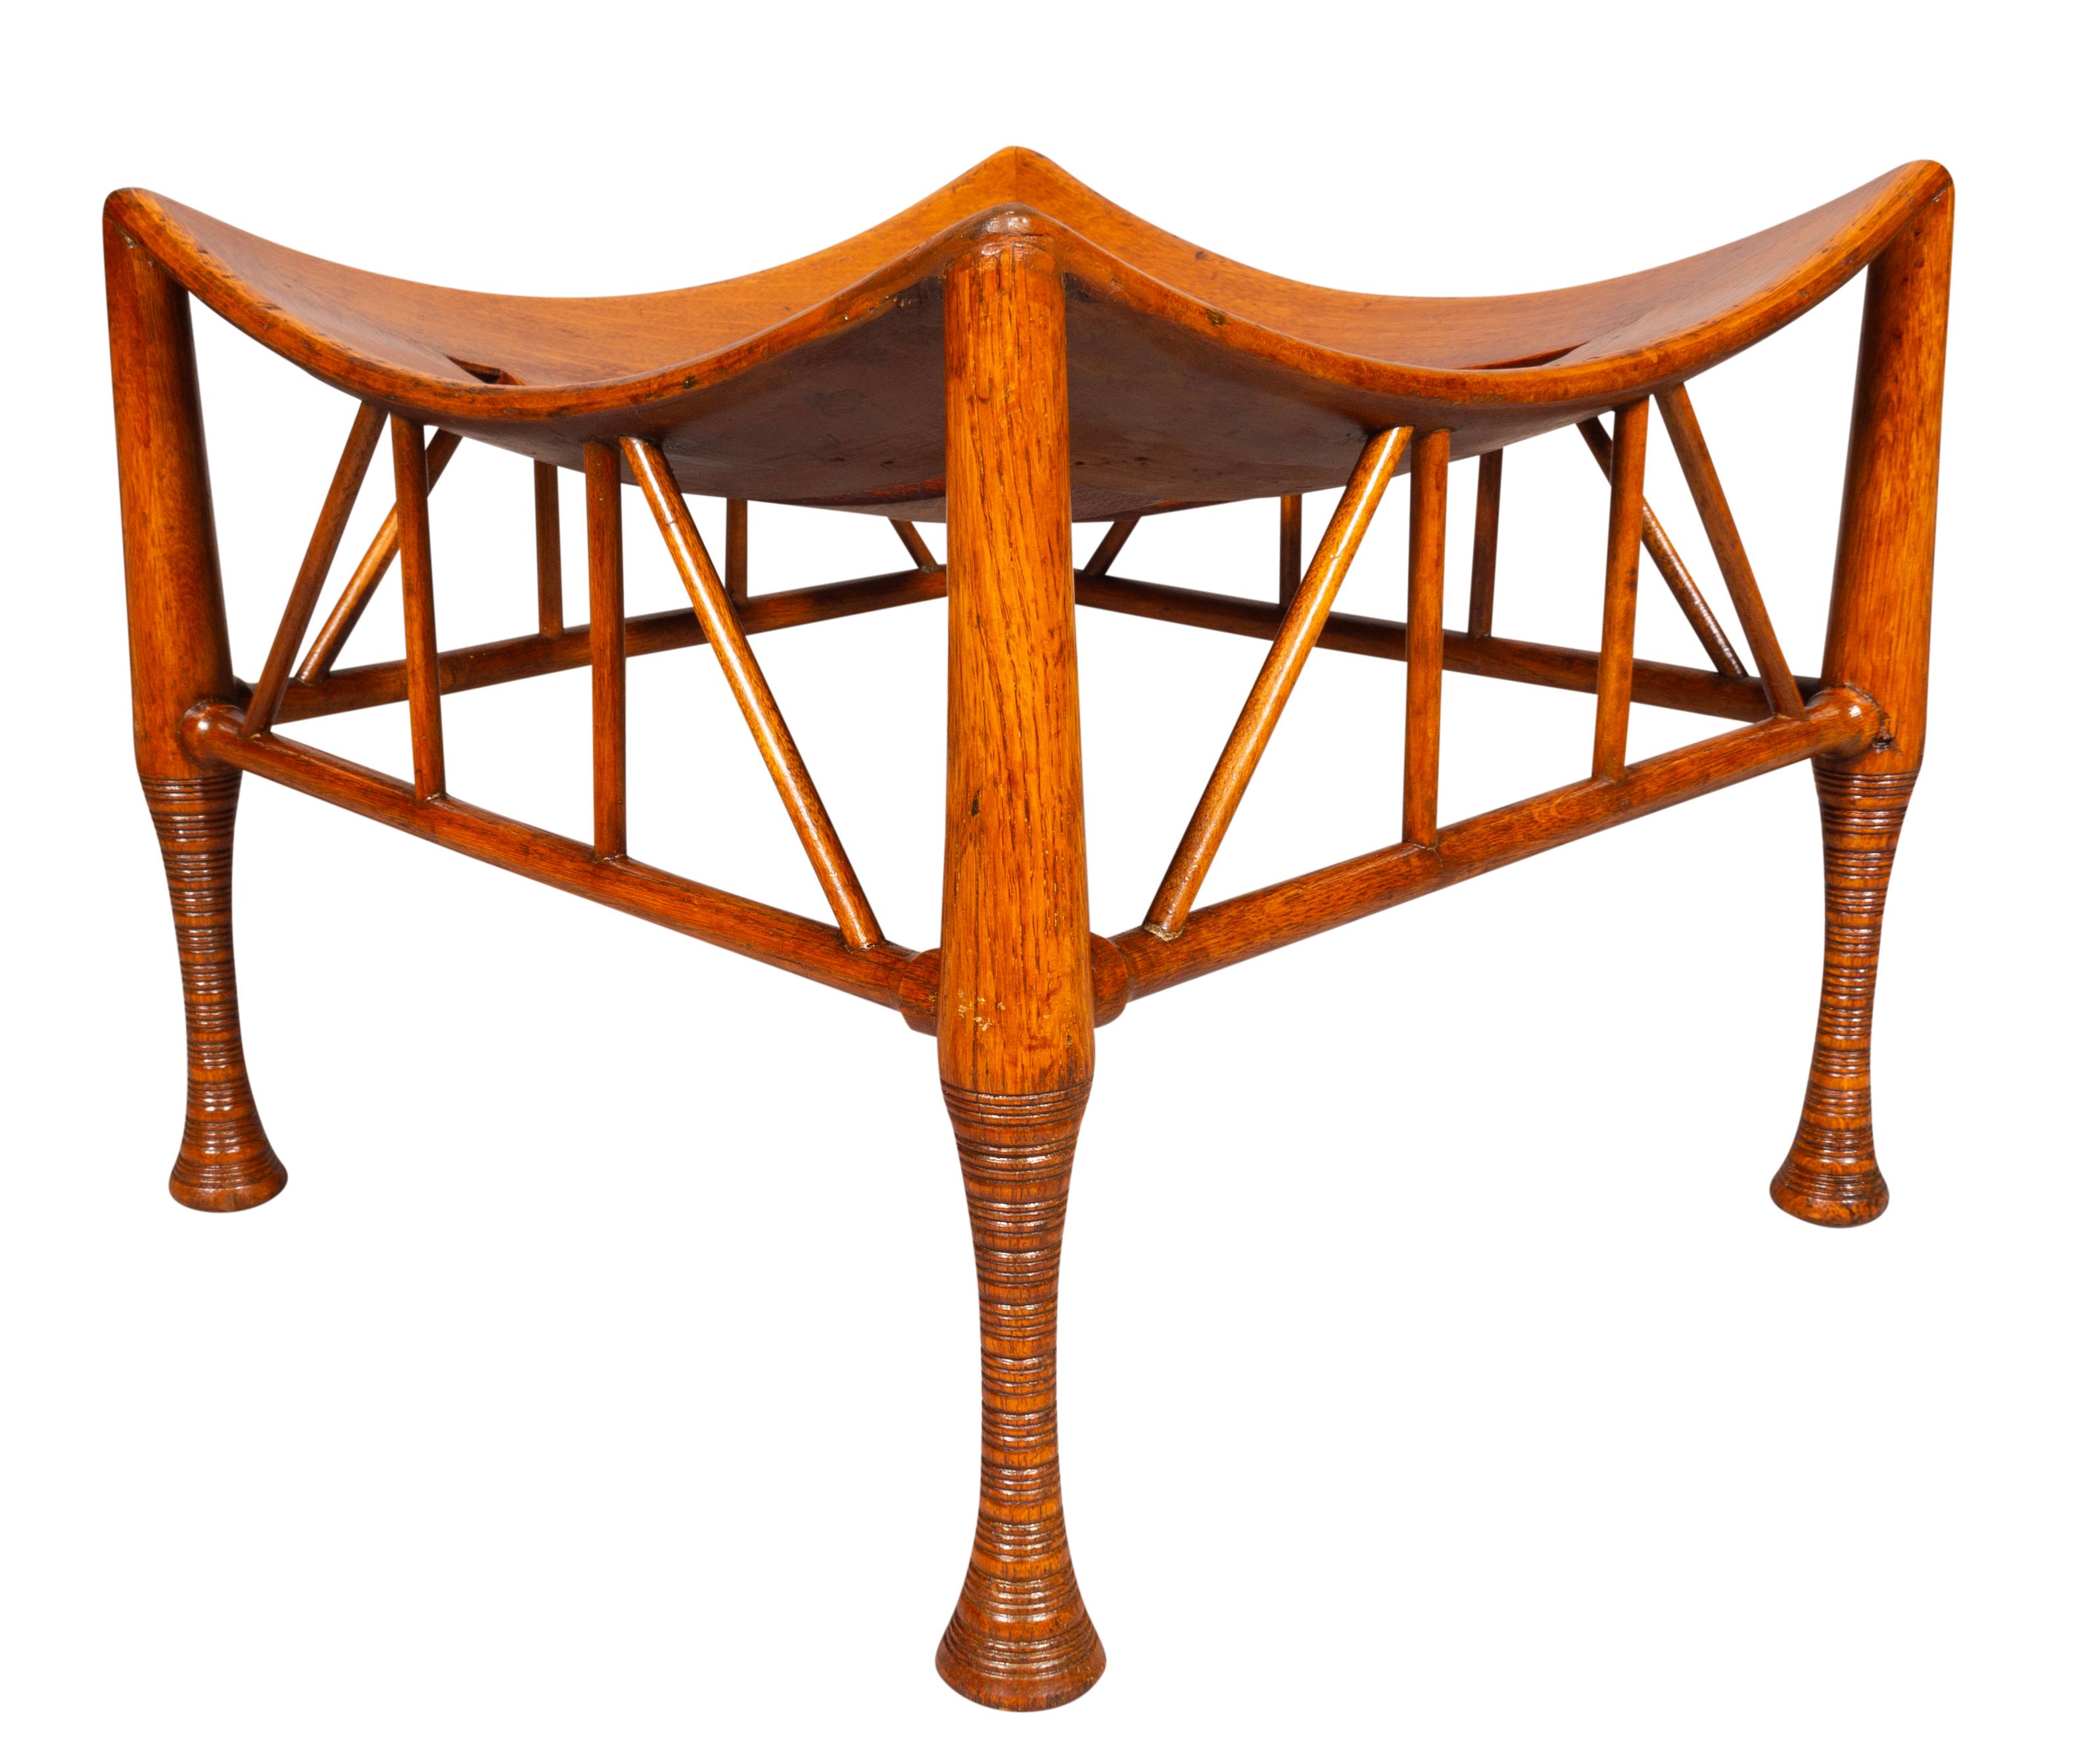 Square in the Egyptian revival style. Curved slat seat with turned legs and stretchers.